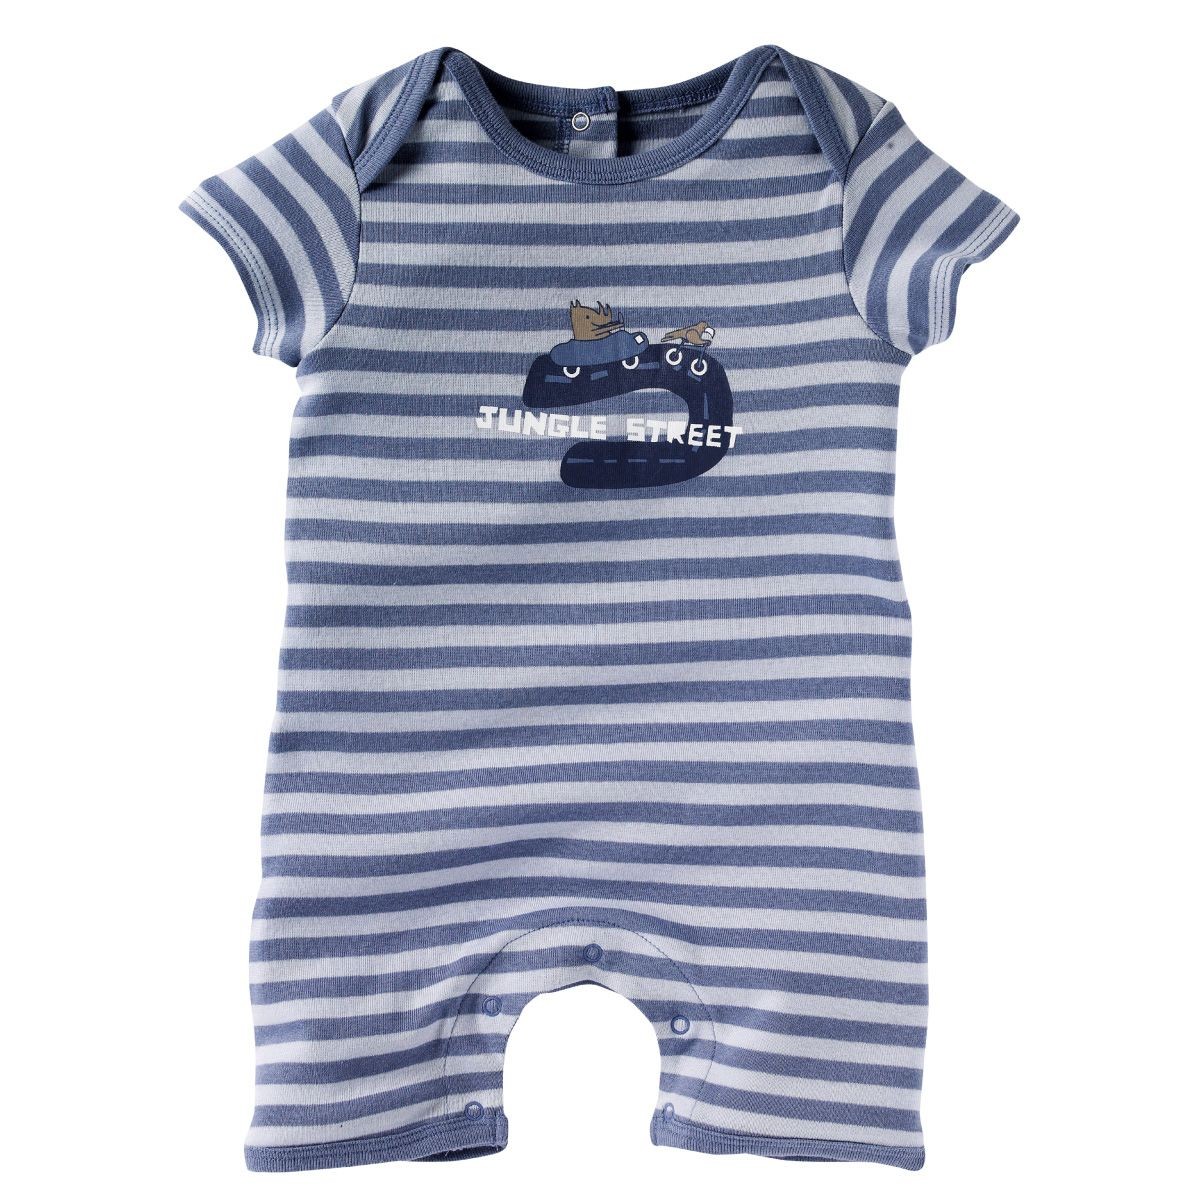 Striped romper suit baby girl or boy